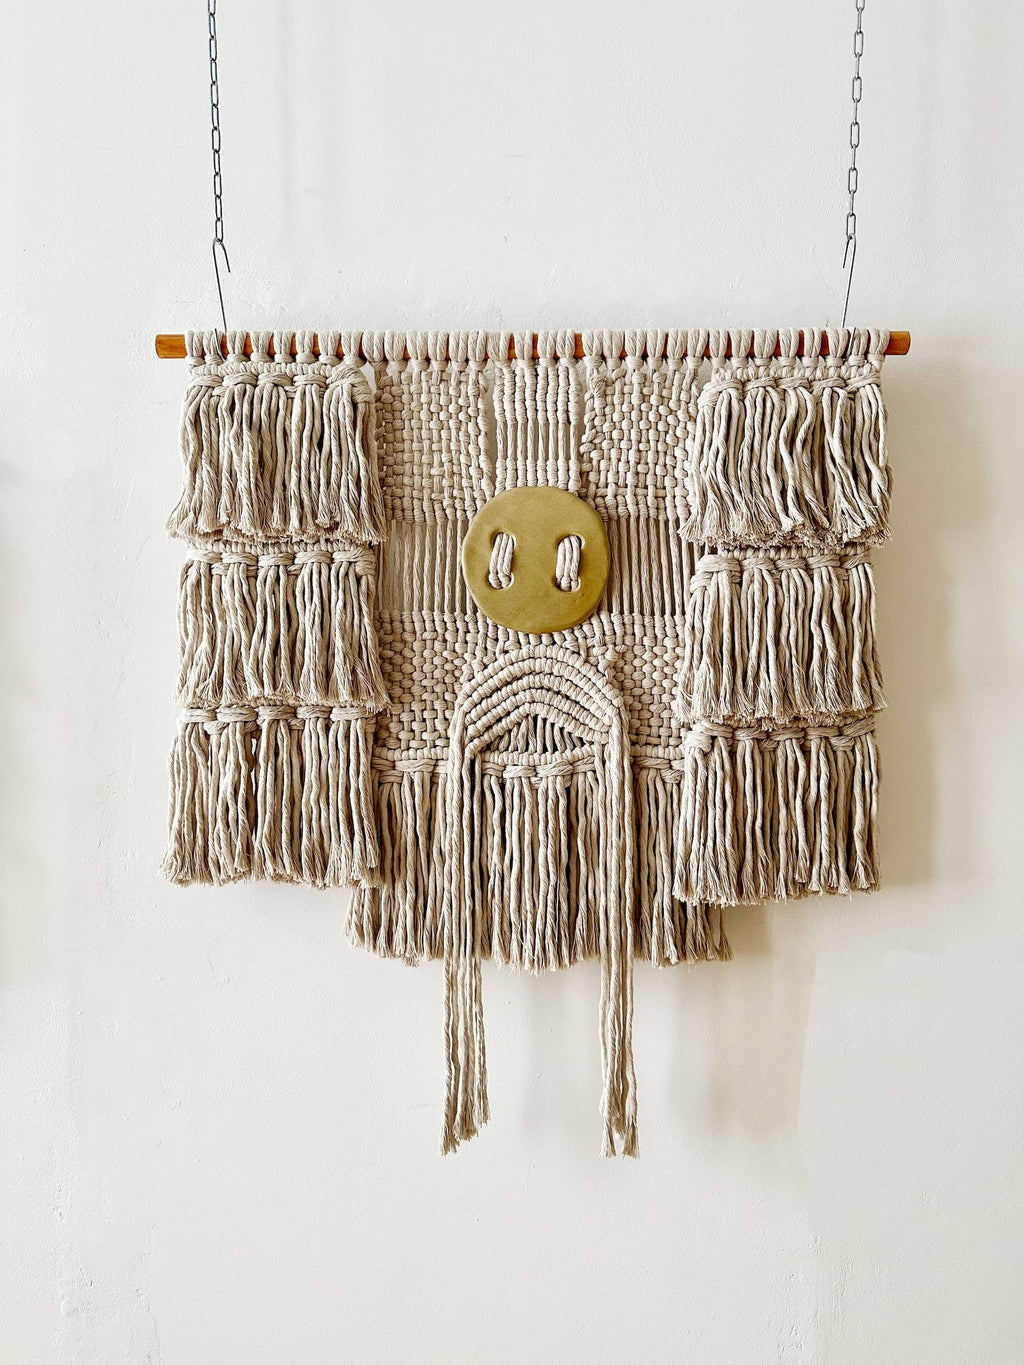 MONTEREY knotted Wall Hanging with Ceramic Detail | grey